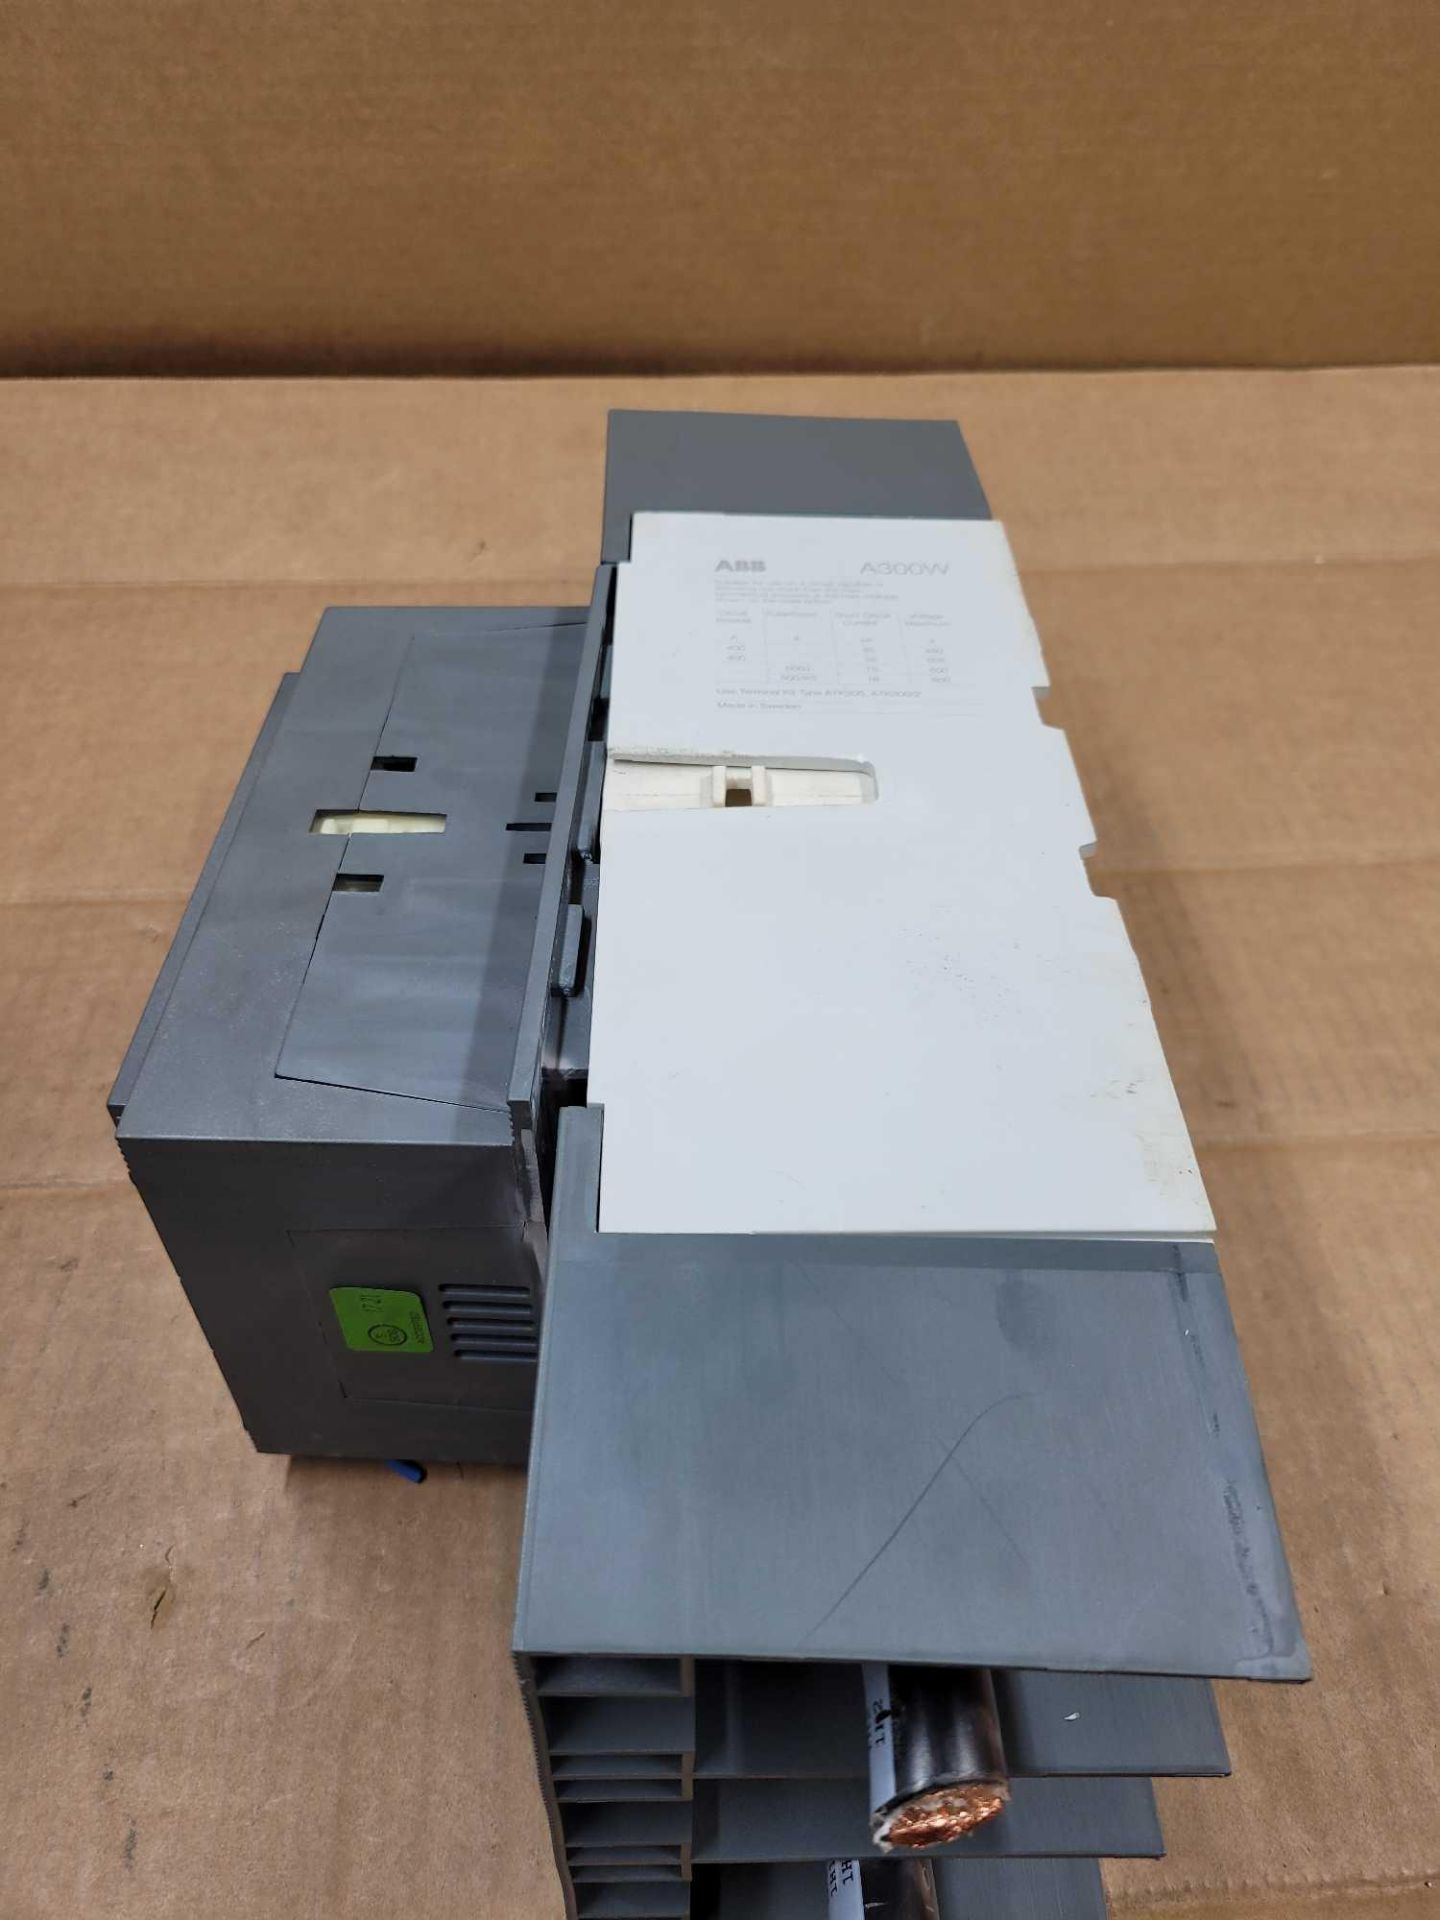 ABB A300W-20 / Welding Isolation Contactor  /  Lot Weight: 14.0 lbs - Image 2 of 8